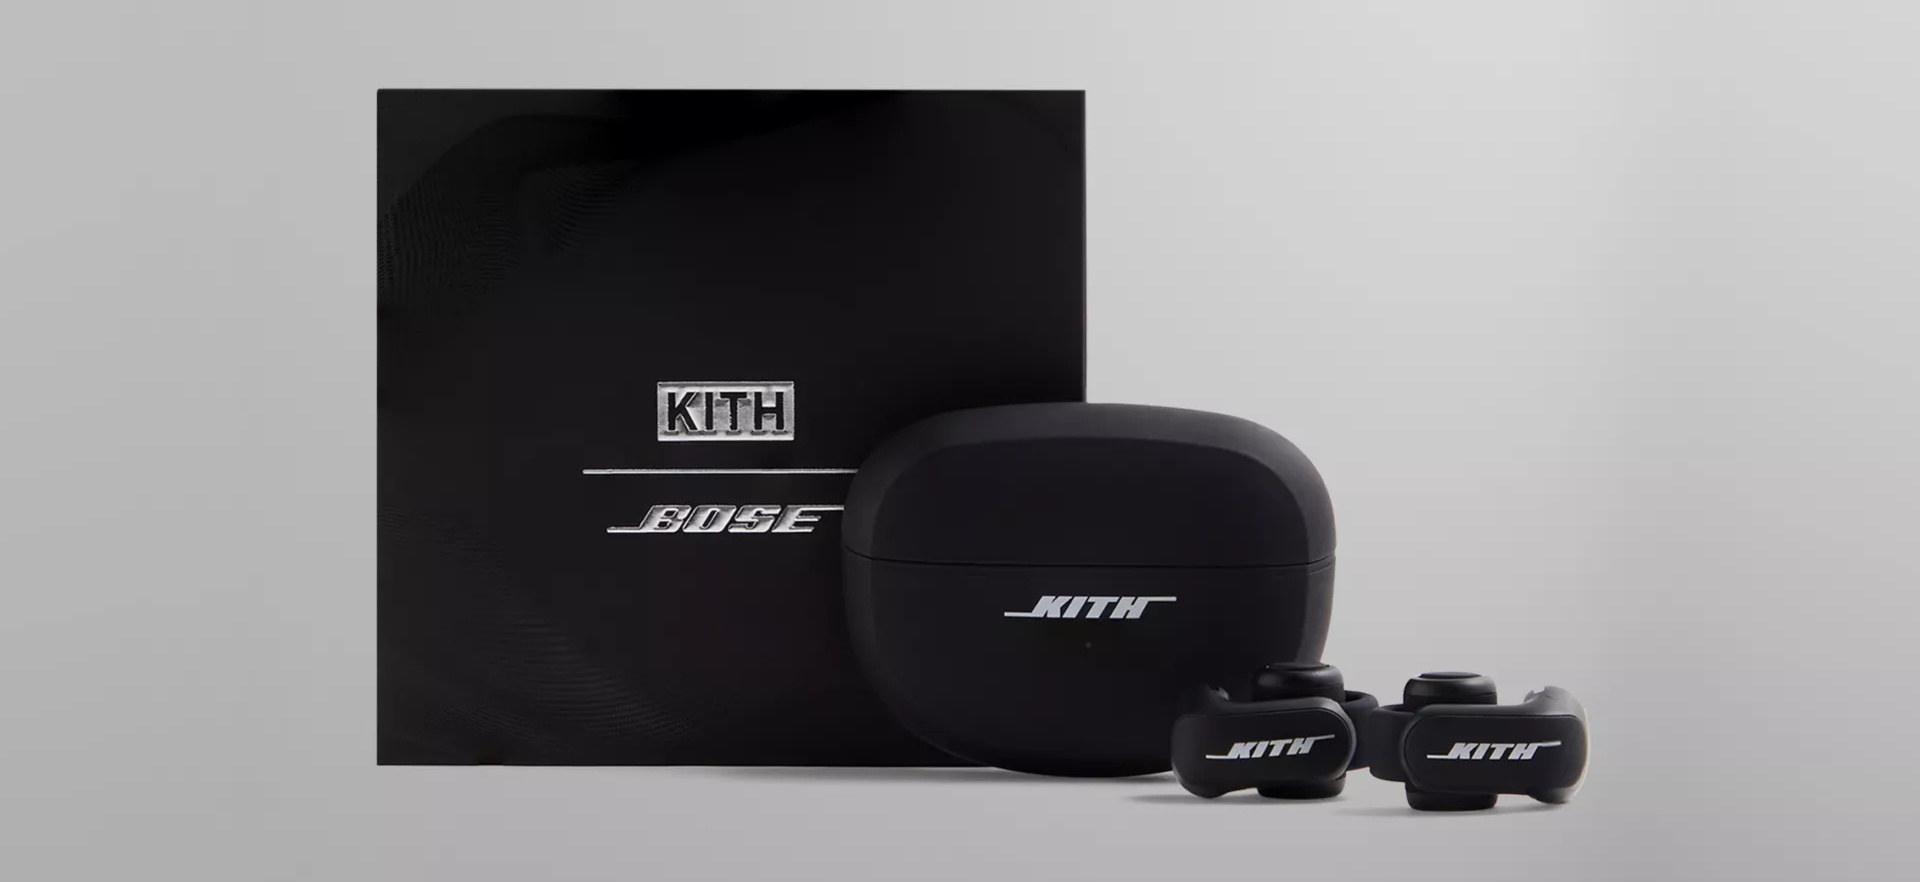 The Kith for Bose Ultra Open Earbuds carton, Charging Case, and Kith for Bose Ultra Open Earbuds